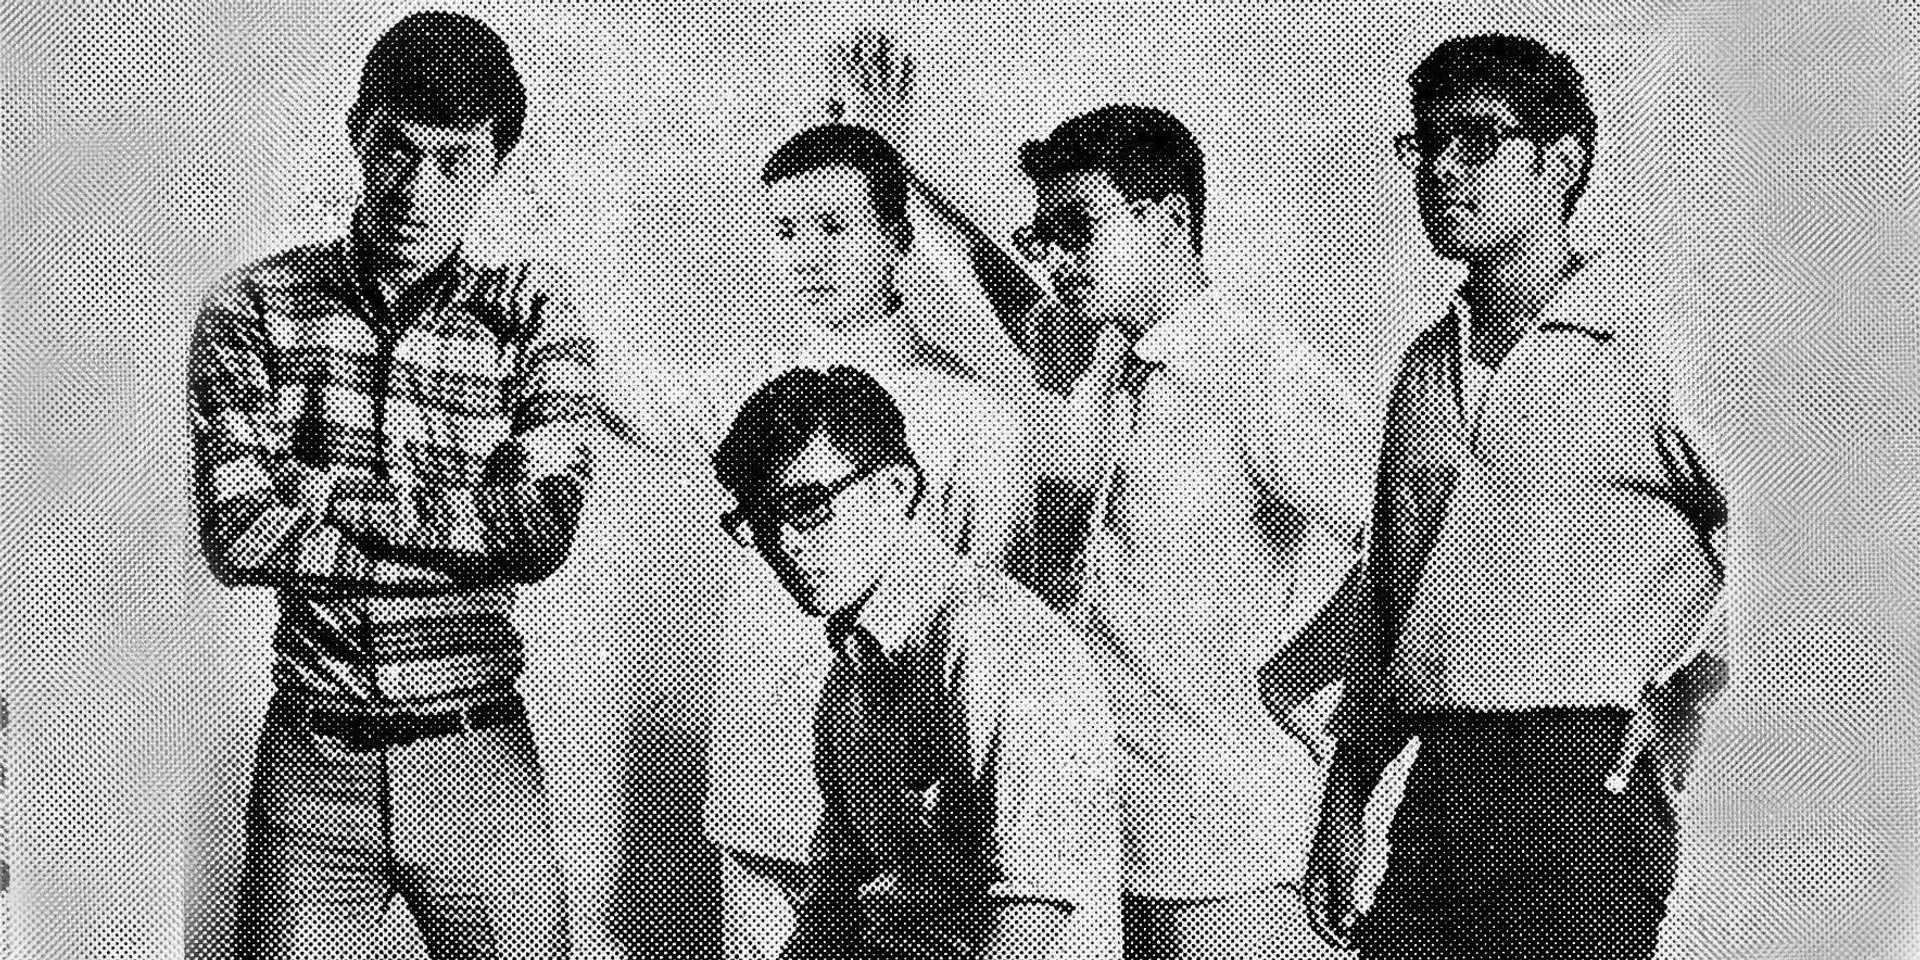 EMI 60s: Rare recordings from 1960s Singapore restored and remastered